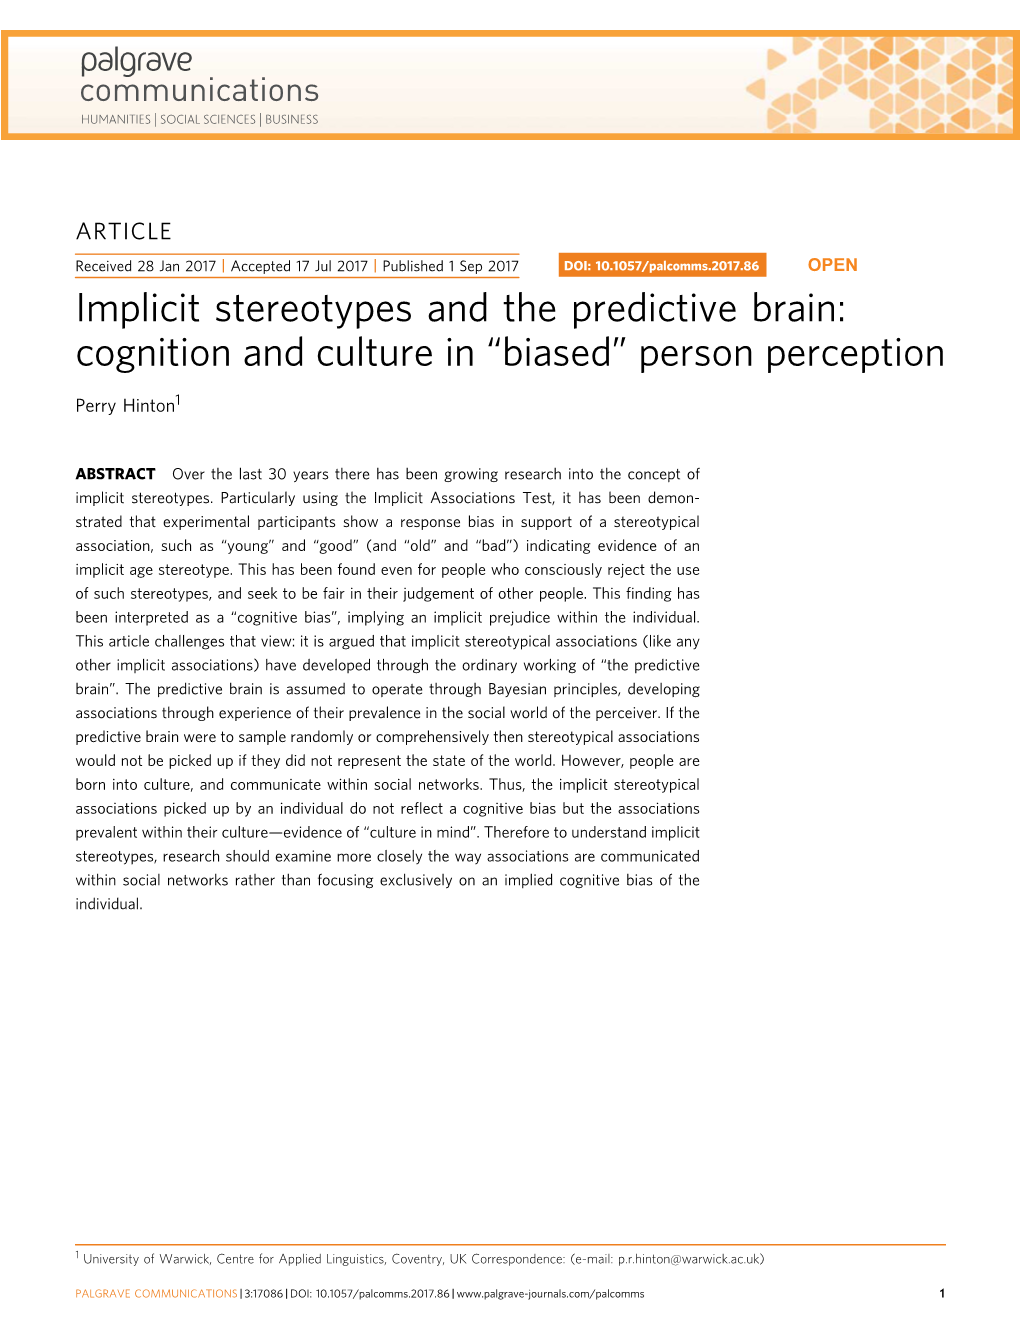 Implicit Stereotypes and the Predictive Brain: Cognition and Culture in “Biased” Person Perception